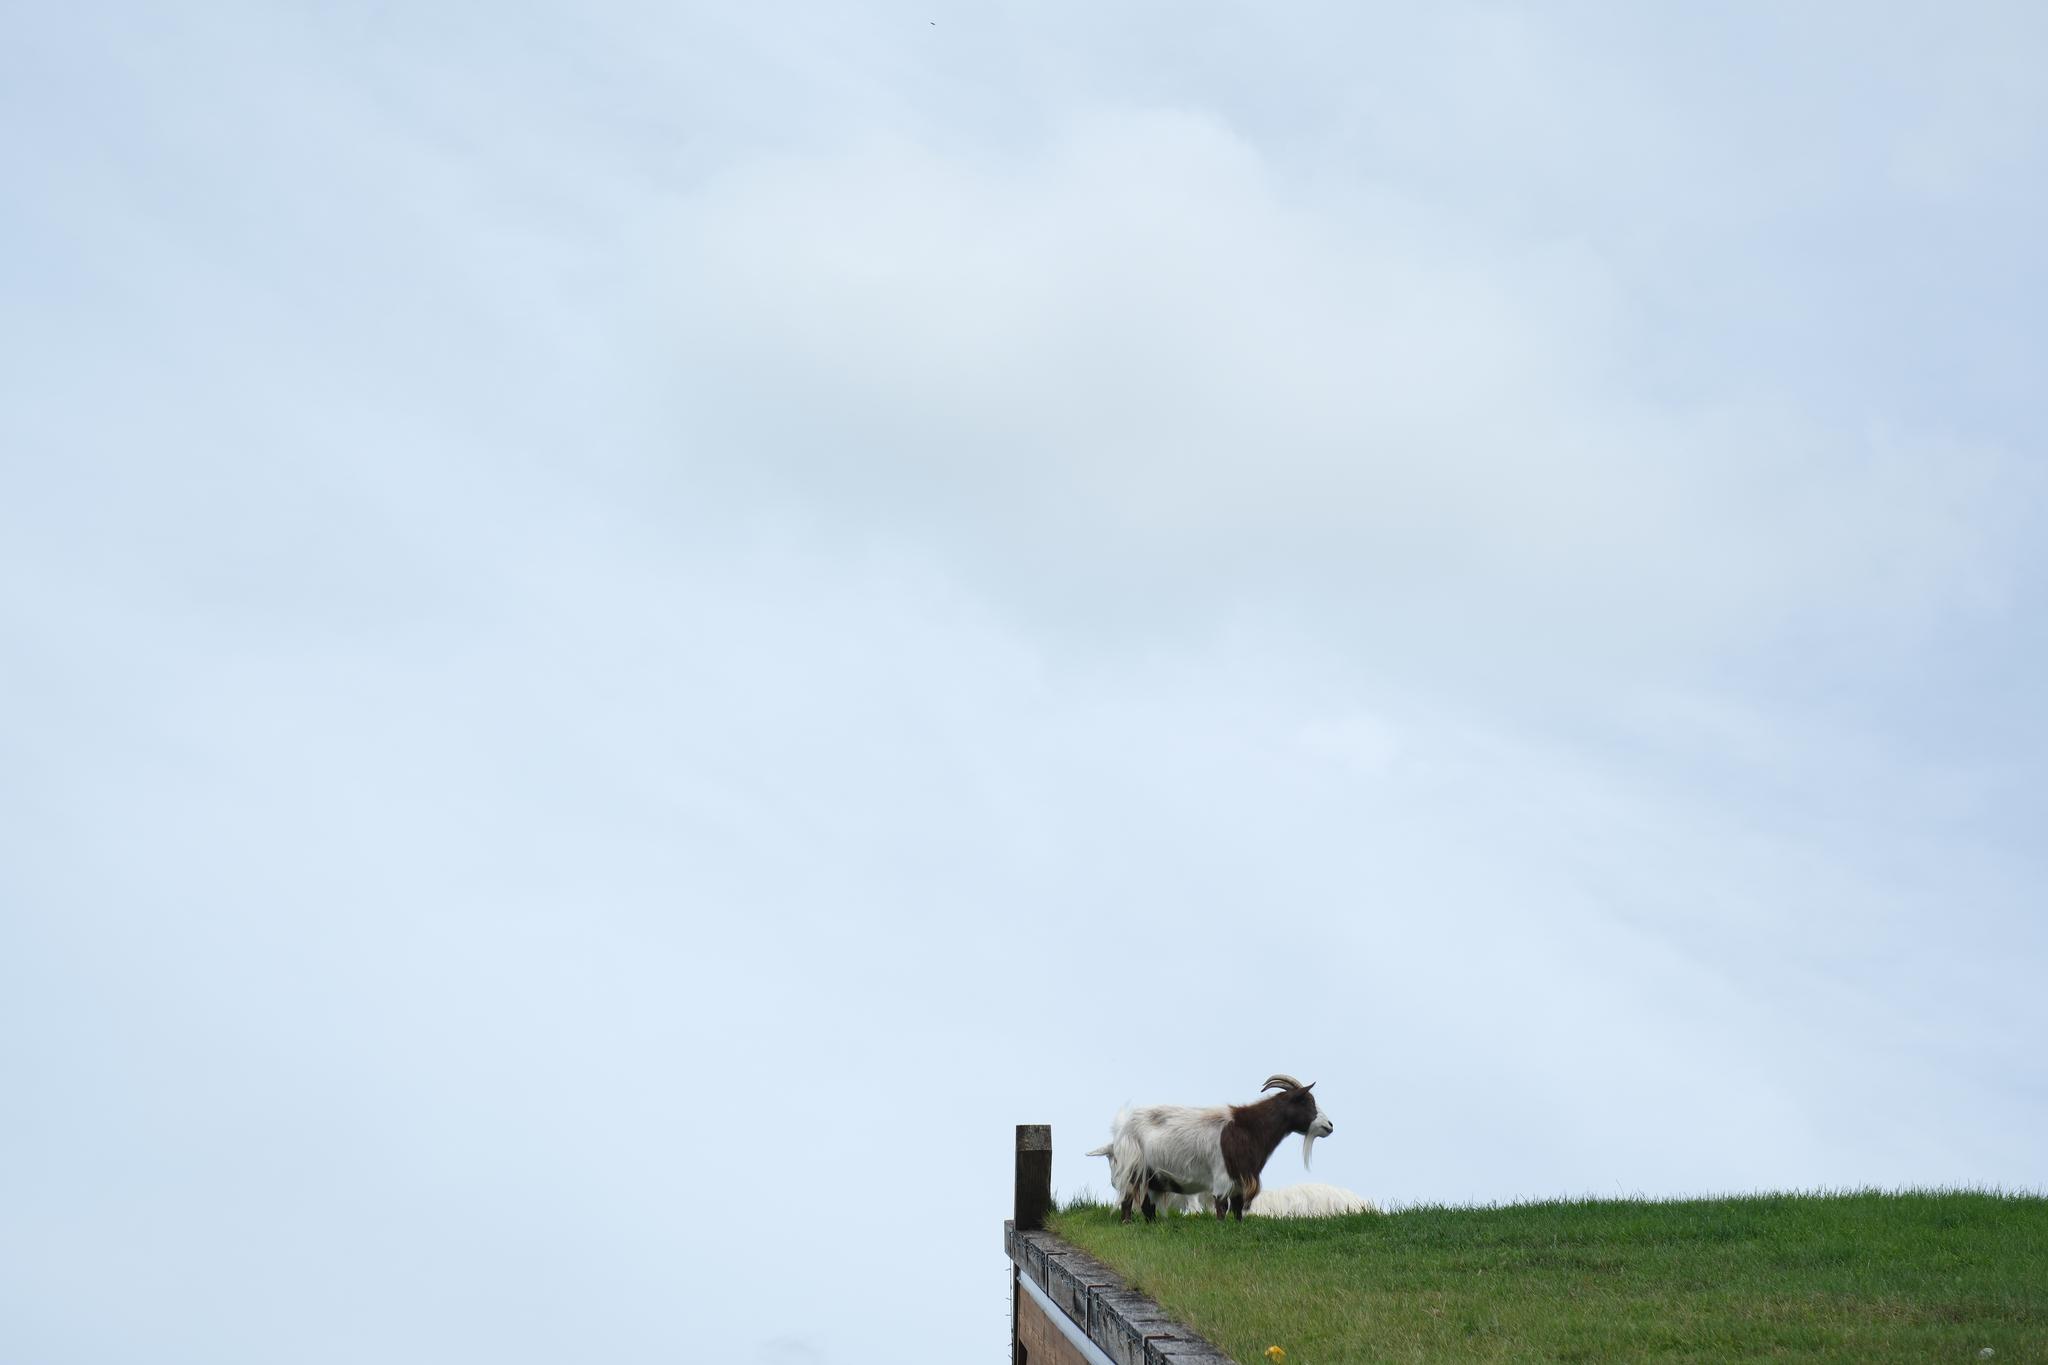 A sheep standing on a grassy hilltop against a cloudy sky